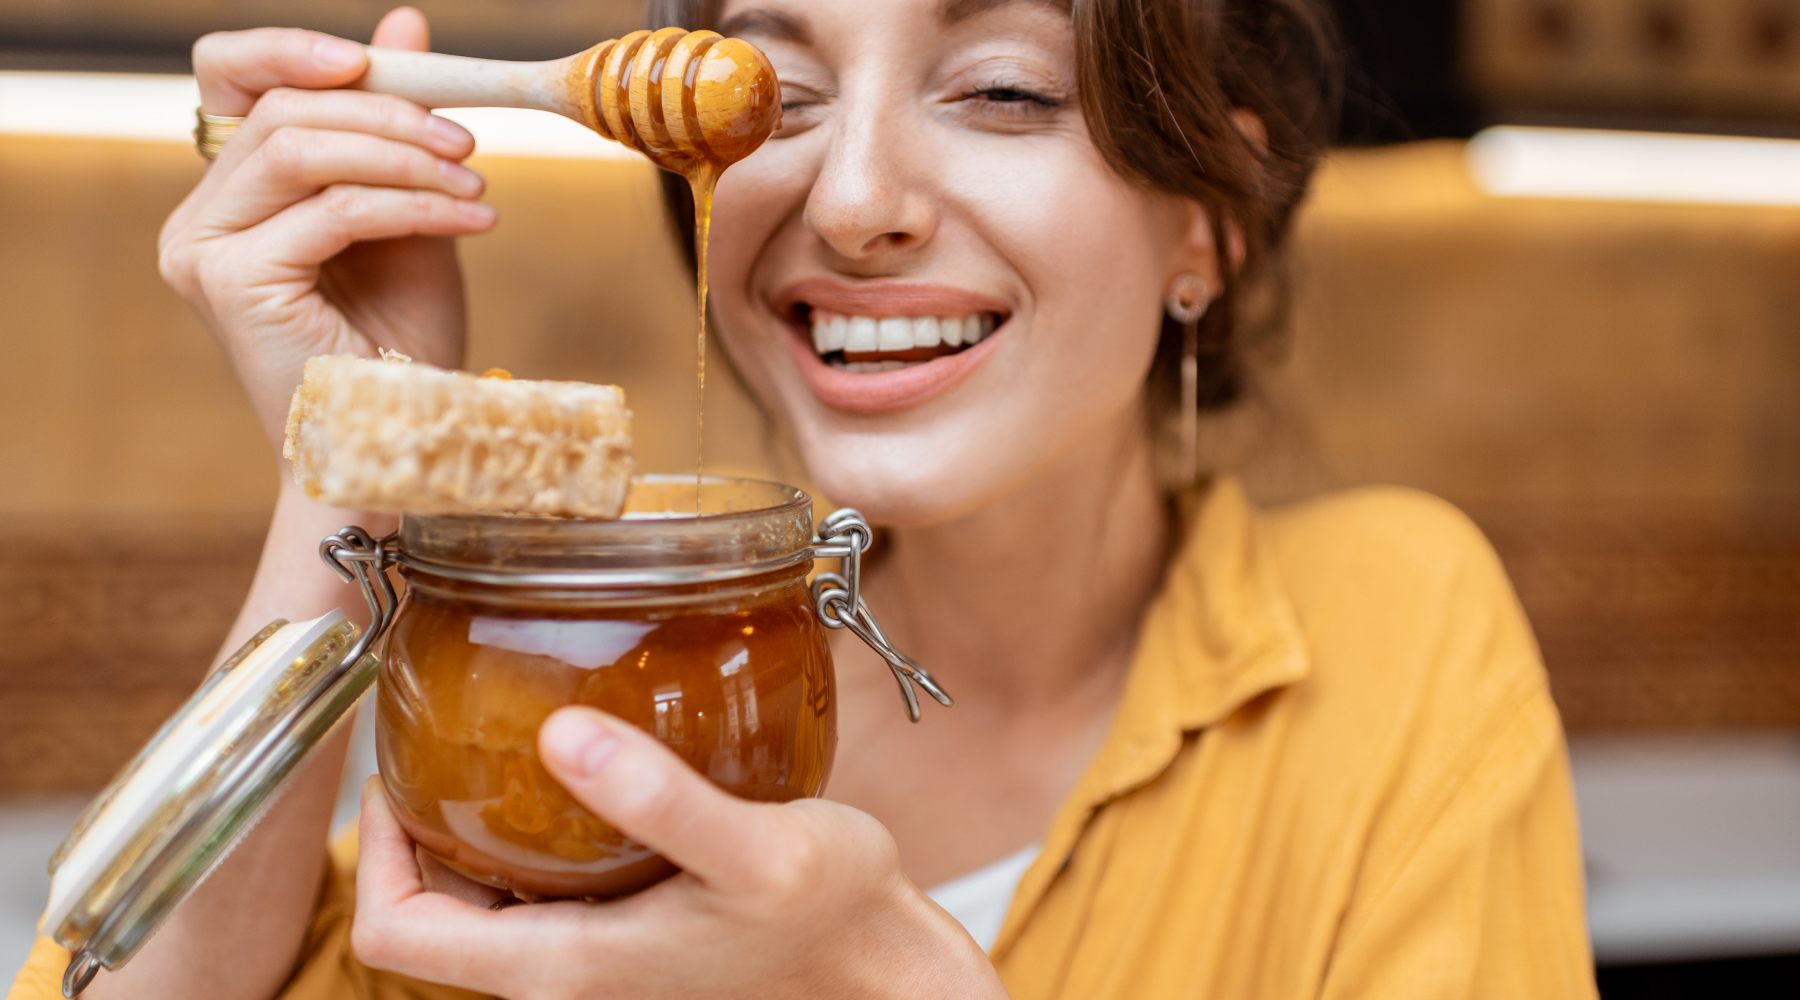 HOW TO CHOOSE THE BEST TYPES OF HONEY FOR YOUR FAMILY